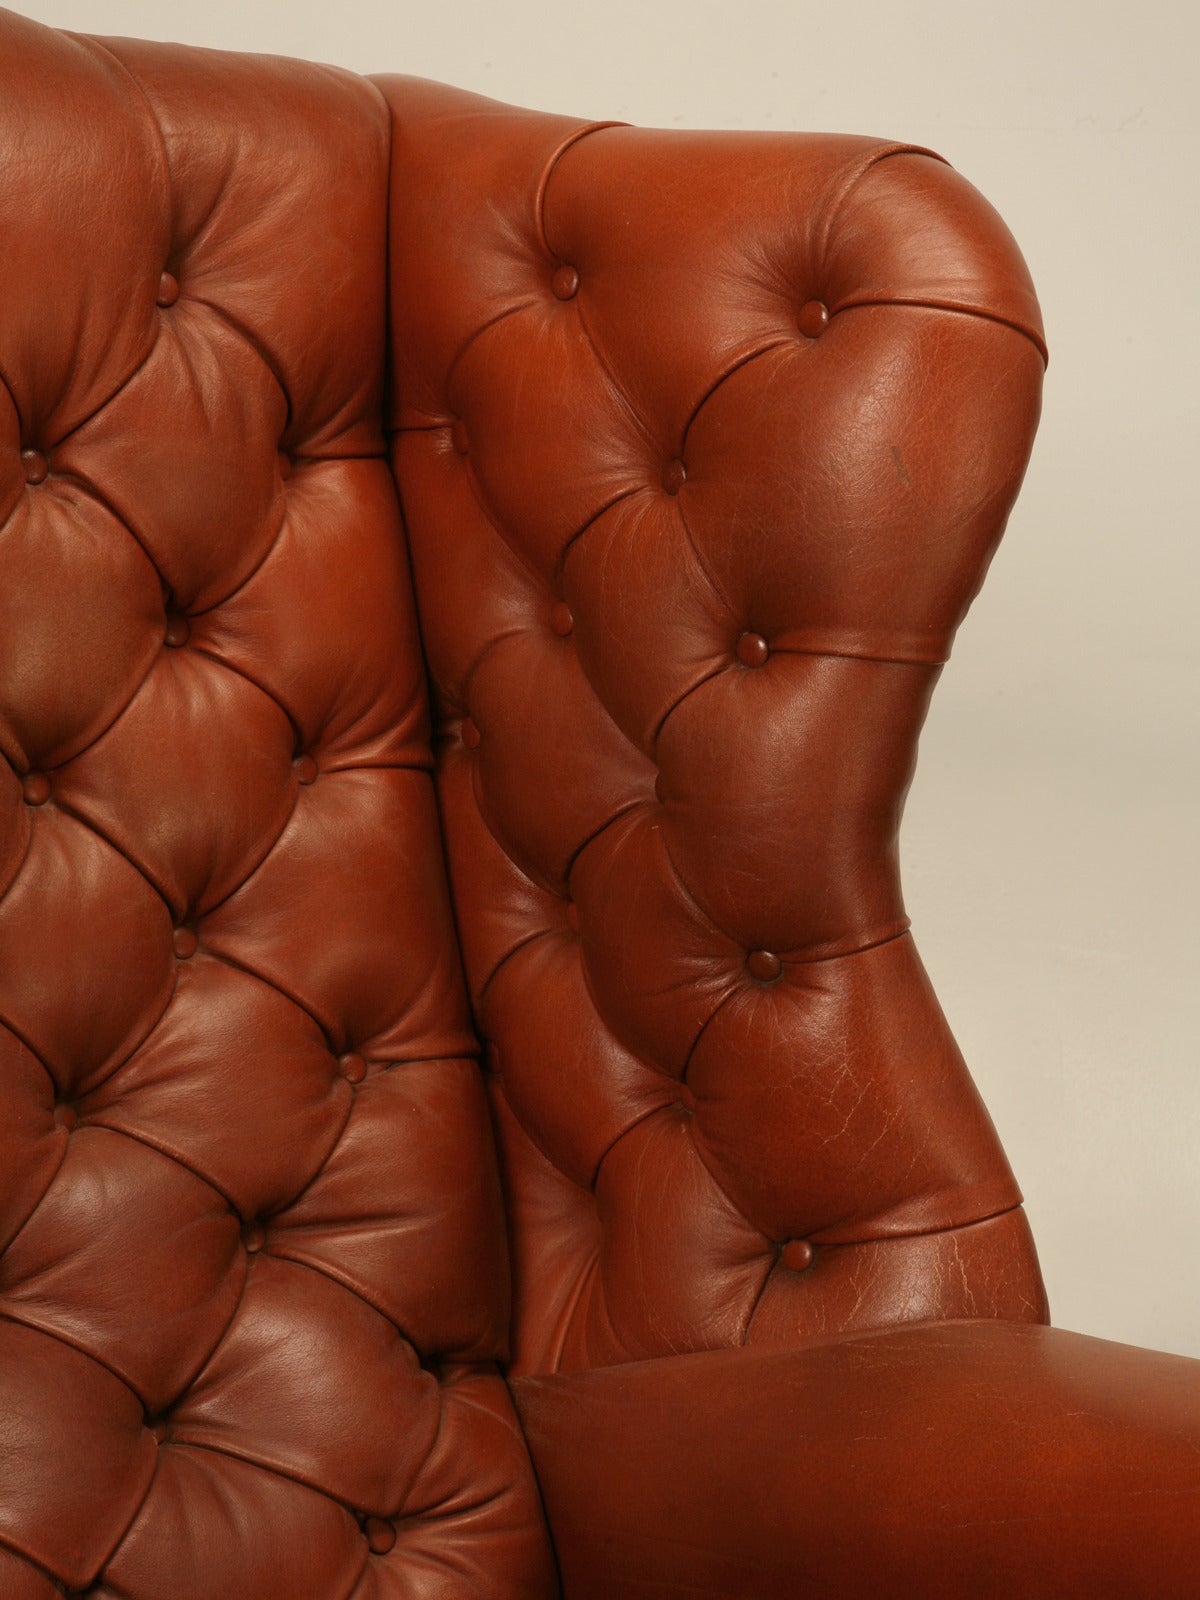 Grand pair of classic English leather Chesterfield wingbacks, from the famous furniture maker; Wade of Great Britain. Wade has long been recognized as one of the finest English manufactures of chairs, with a history dating back to 1921. Their